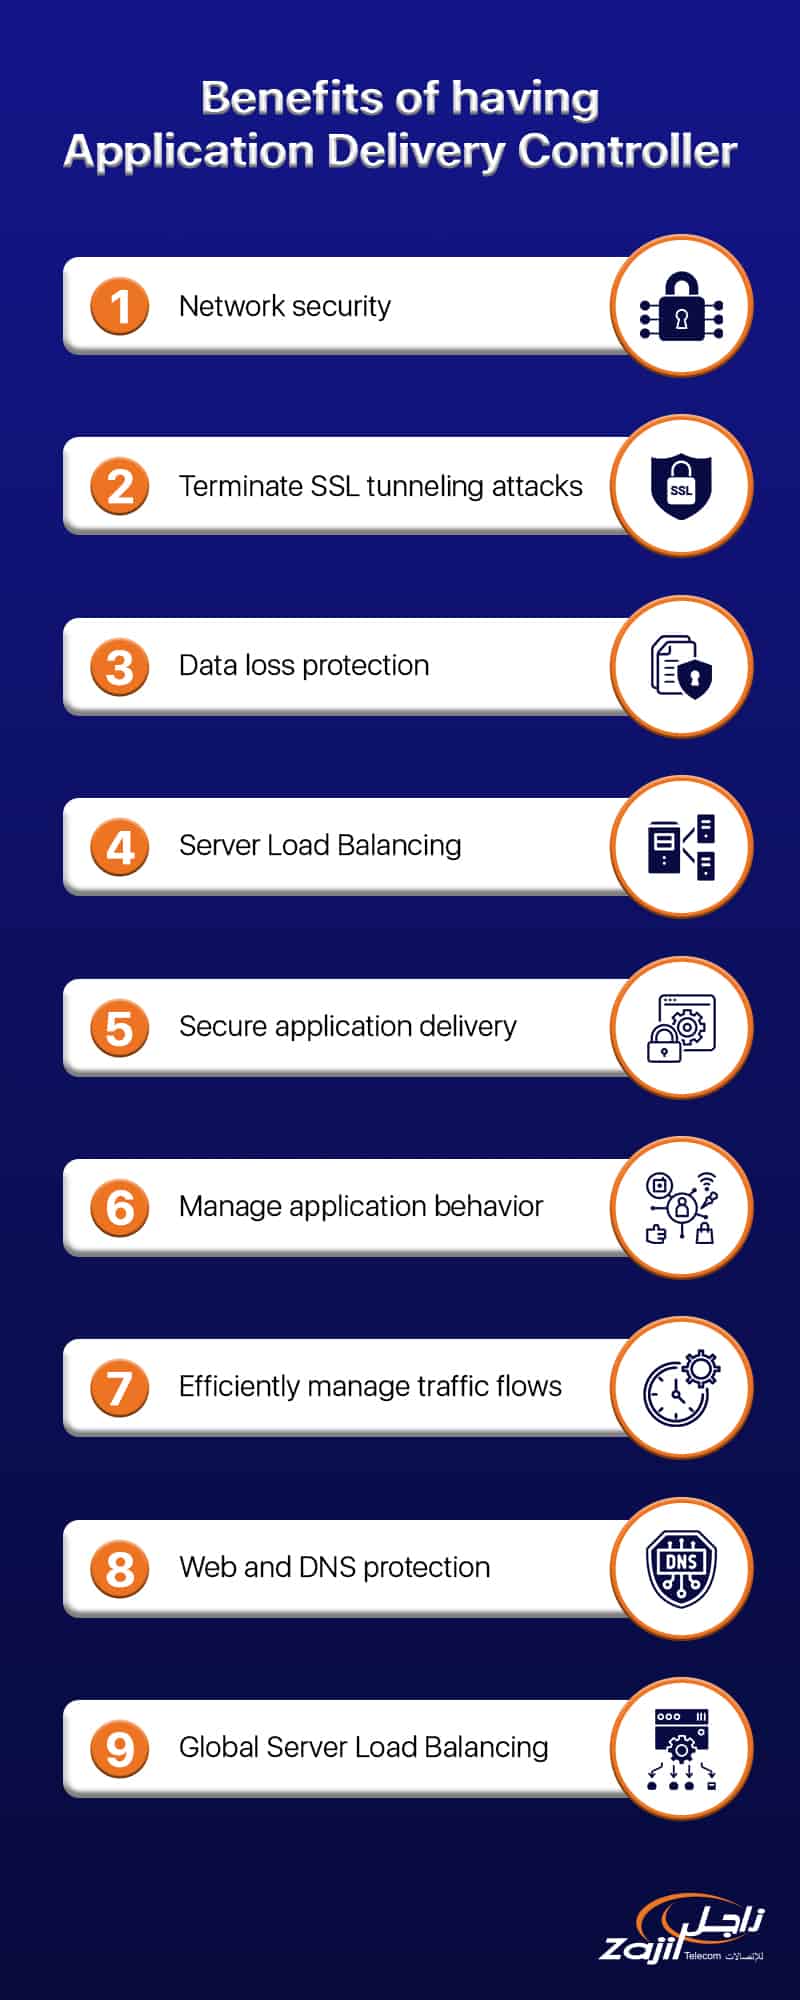 Benefits of Application Delivery Controller